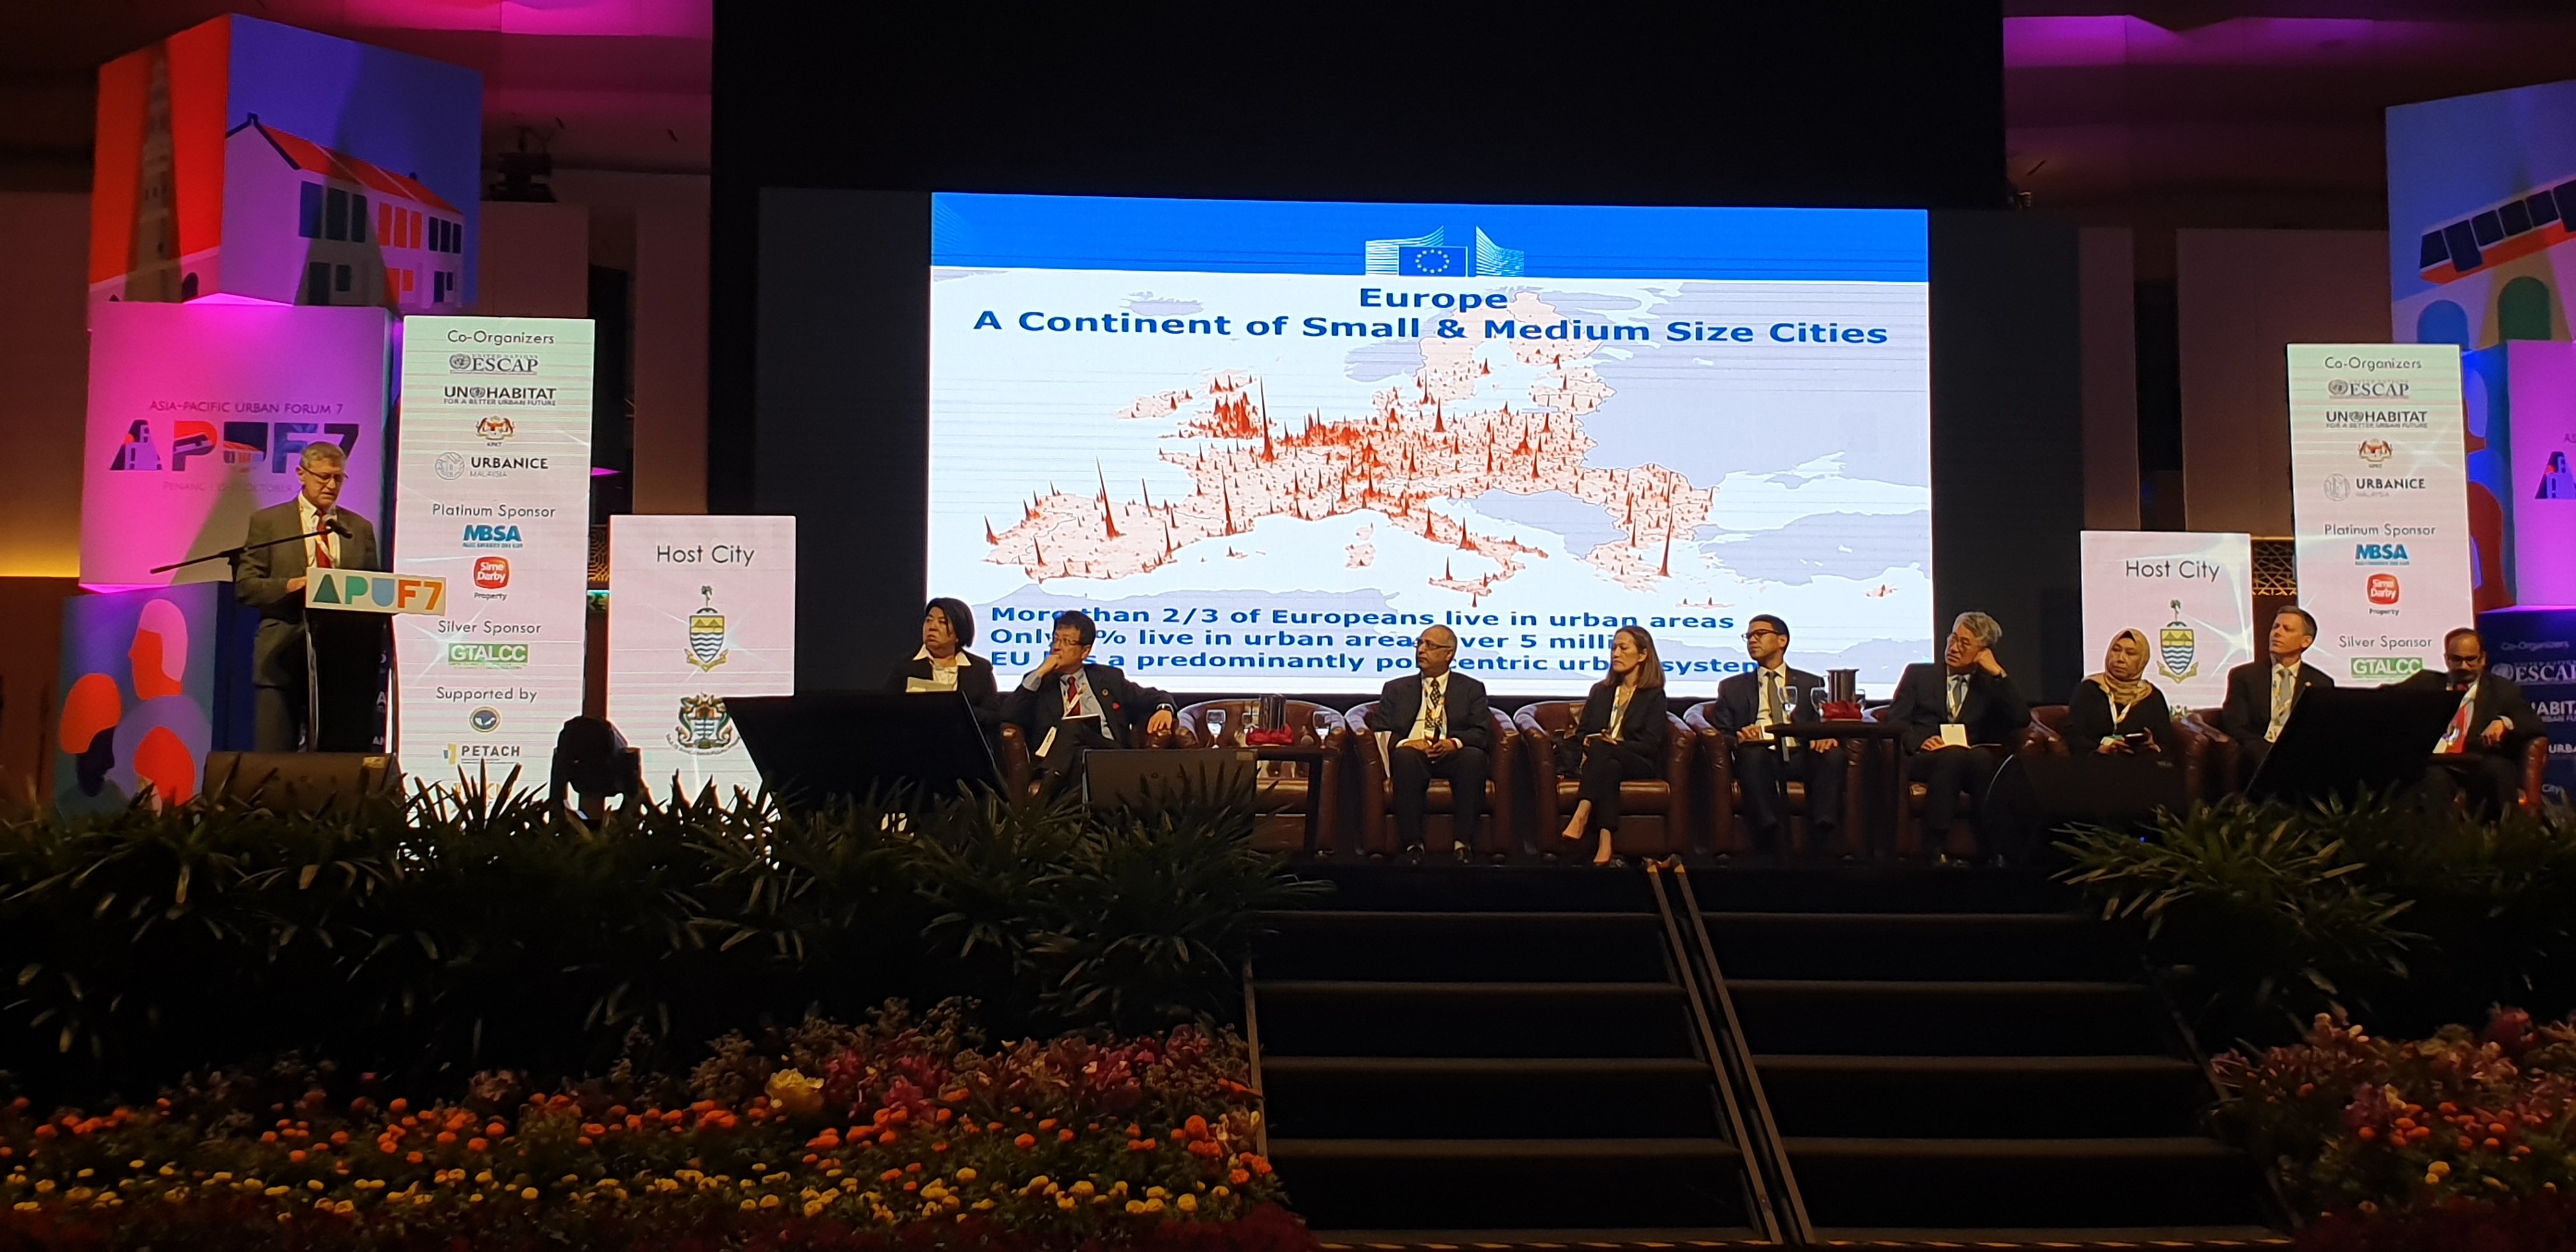 IUC-Asia engaging with key urban development experts at the Seventh Asia-Pacific Urban Forum (APUF-7), Penang, Malaysia